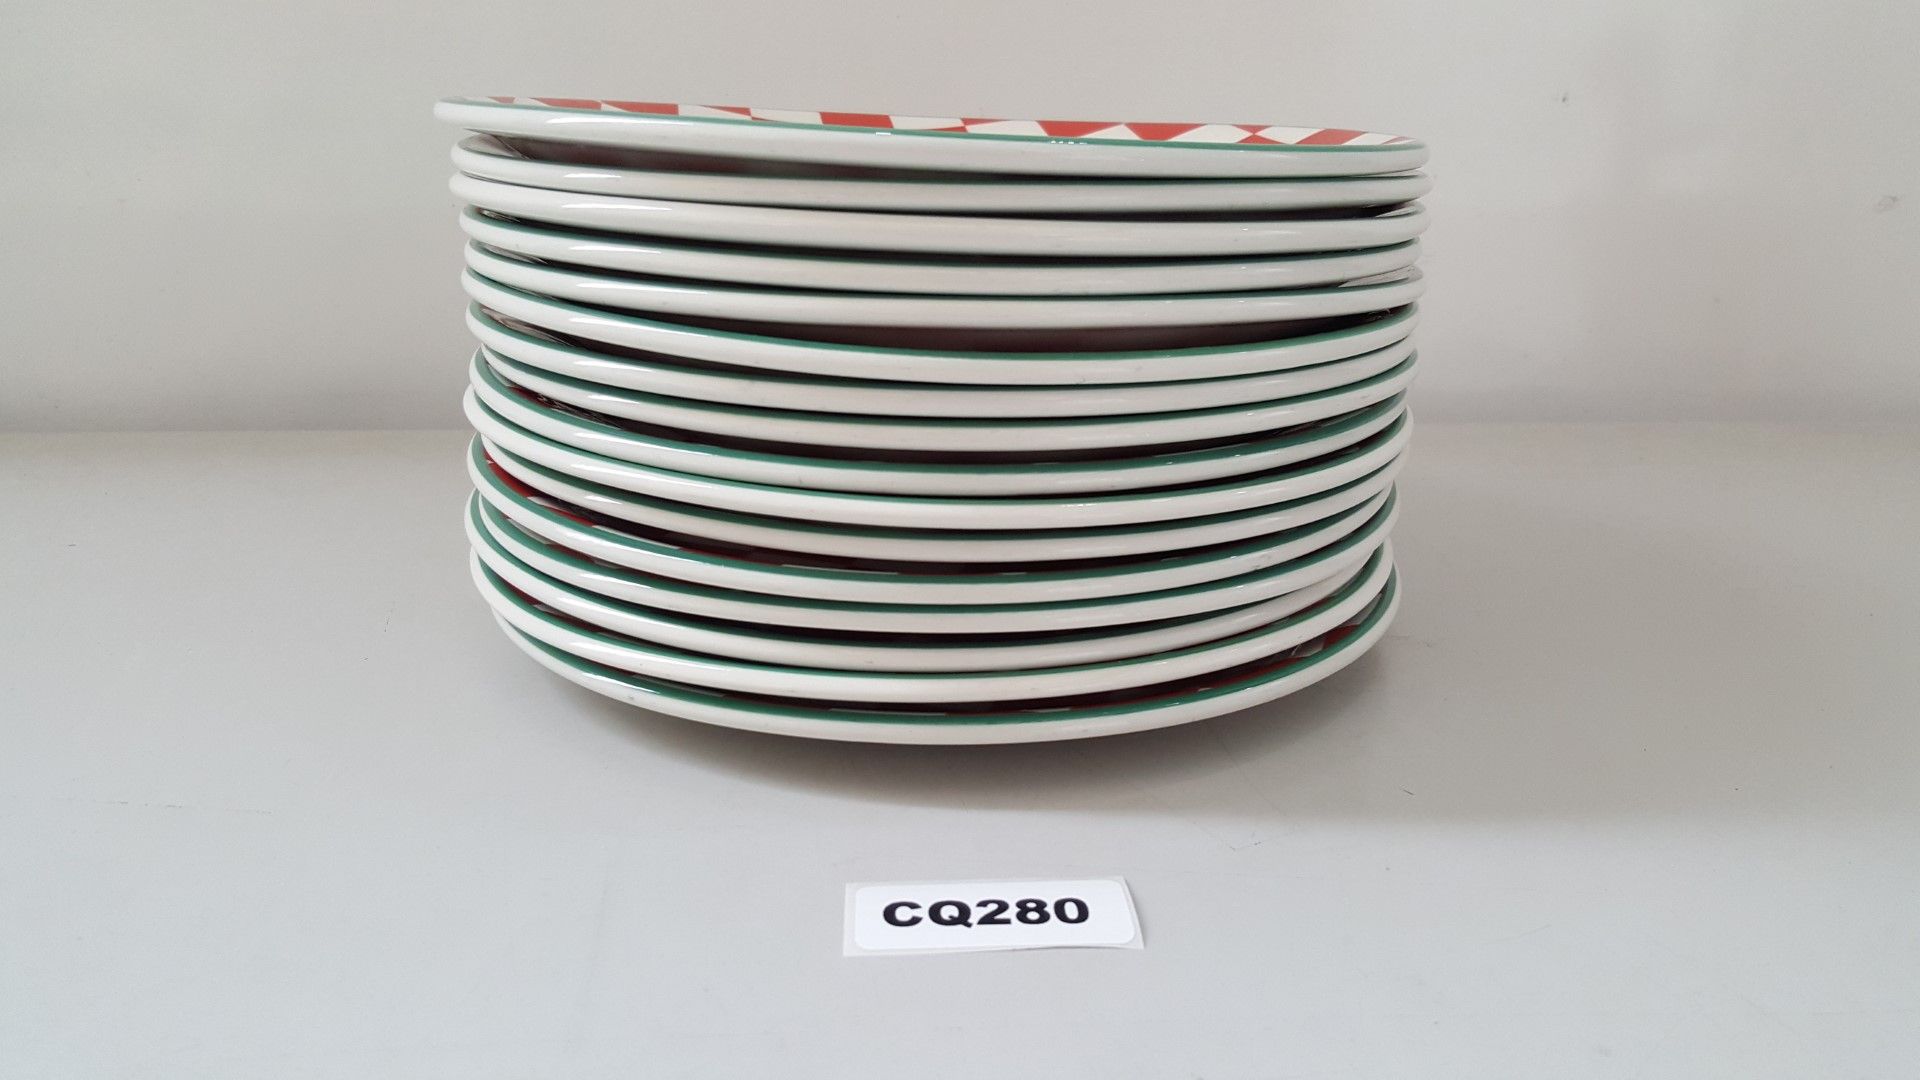 16 x Steelite Plates Checkered Red&White With Green Outline 25CM - Ref CQ280 - Image 2 of 4